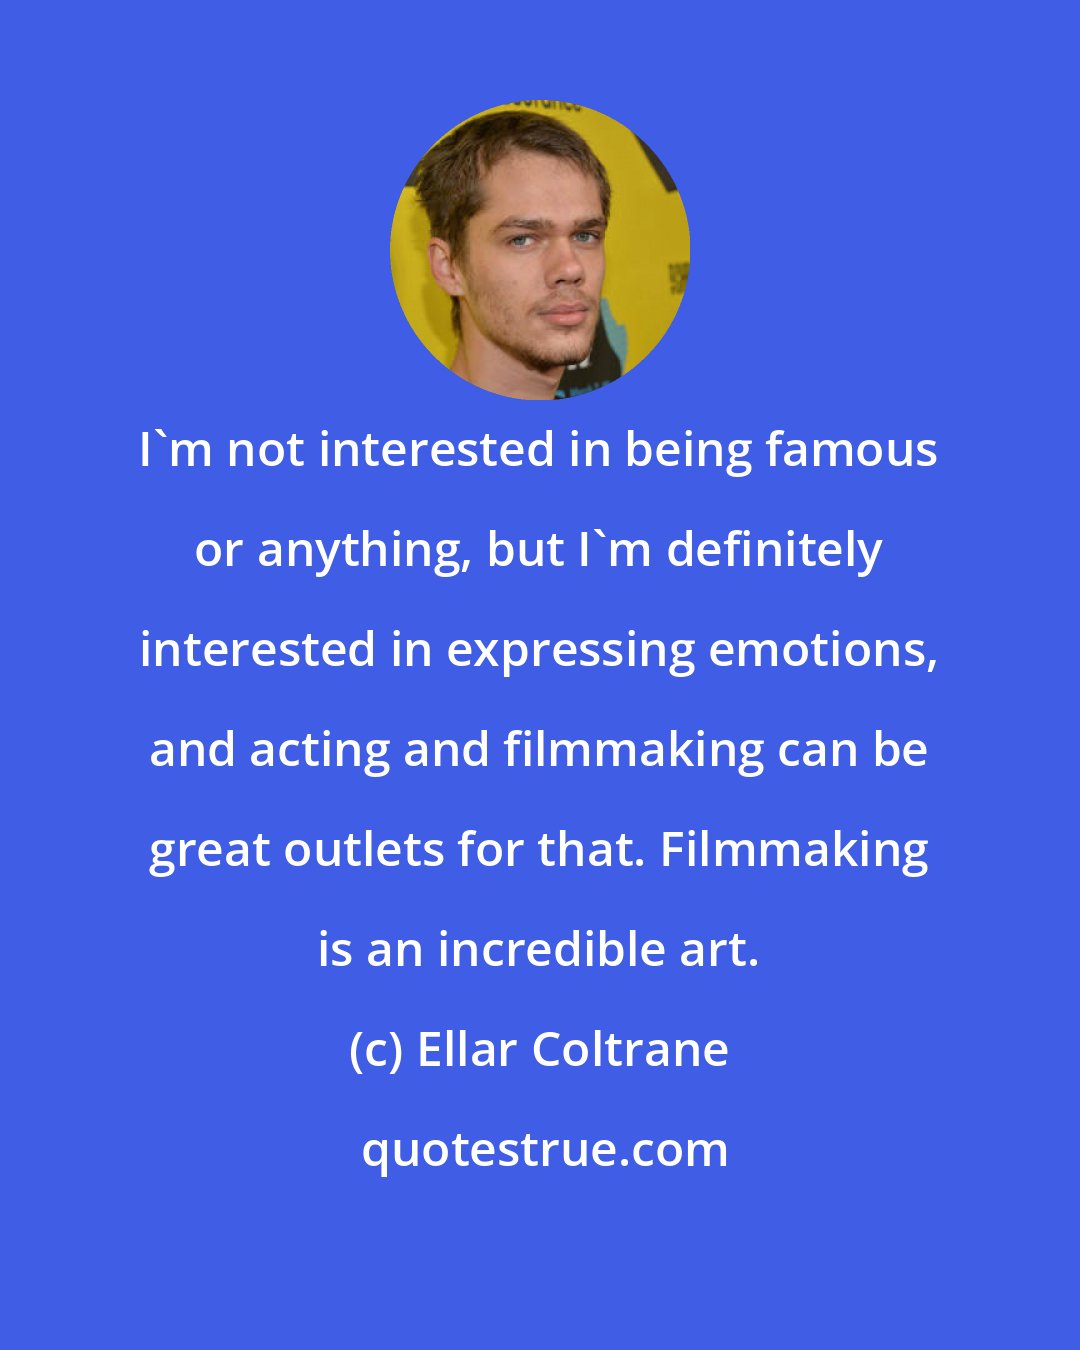 Ellar Coltrane: I'm not interested in being famous or anything, but I'm definitely interested in expressing emotions, and acting and filmmaking can be great outlets for that. Filmmaking is an incredible art.